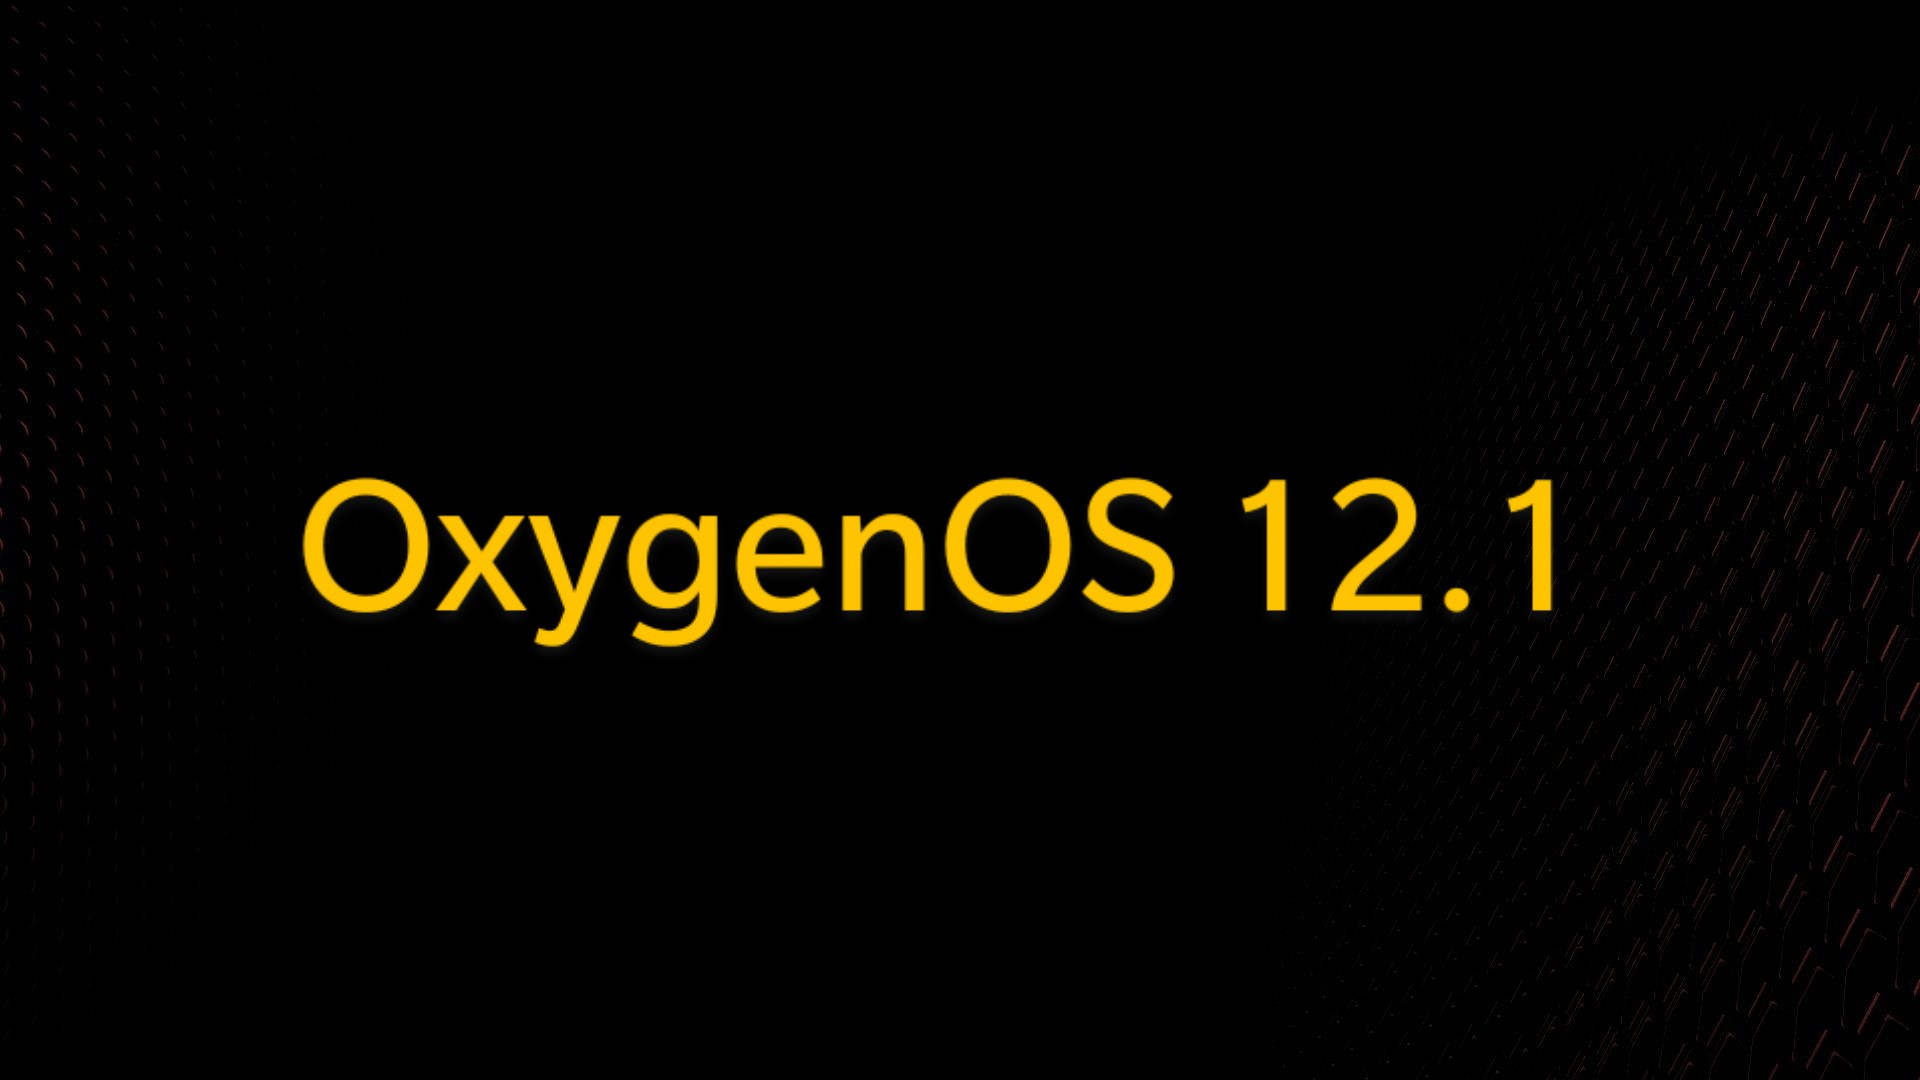 OxygenOS 12.1 Stable C.20 Released for Oneplus 8 , 8 Pro & 8T Europe Variants – Download here